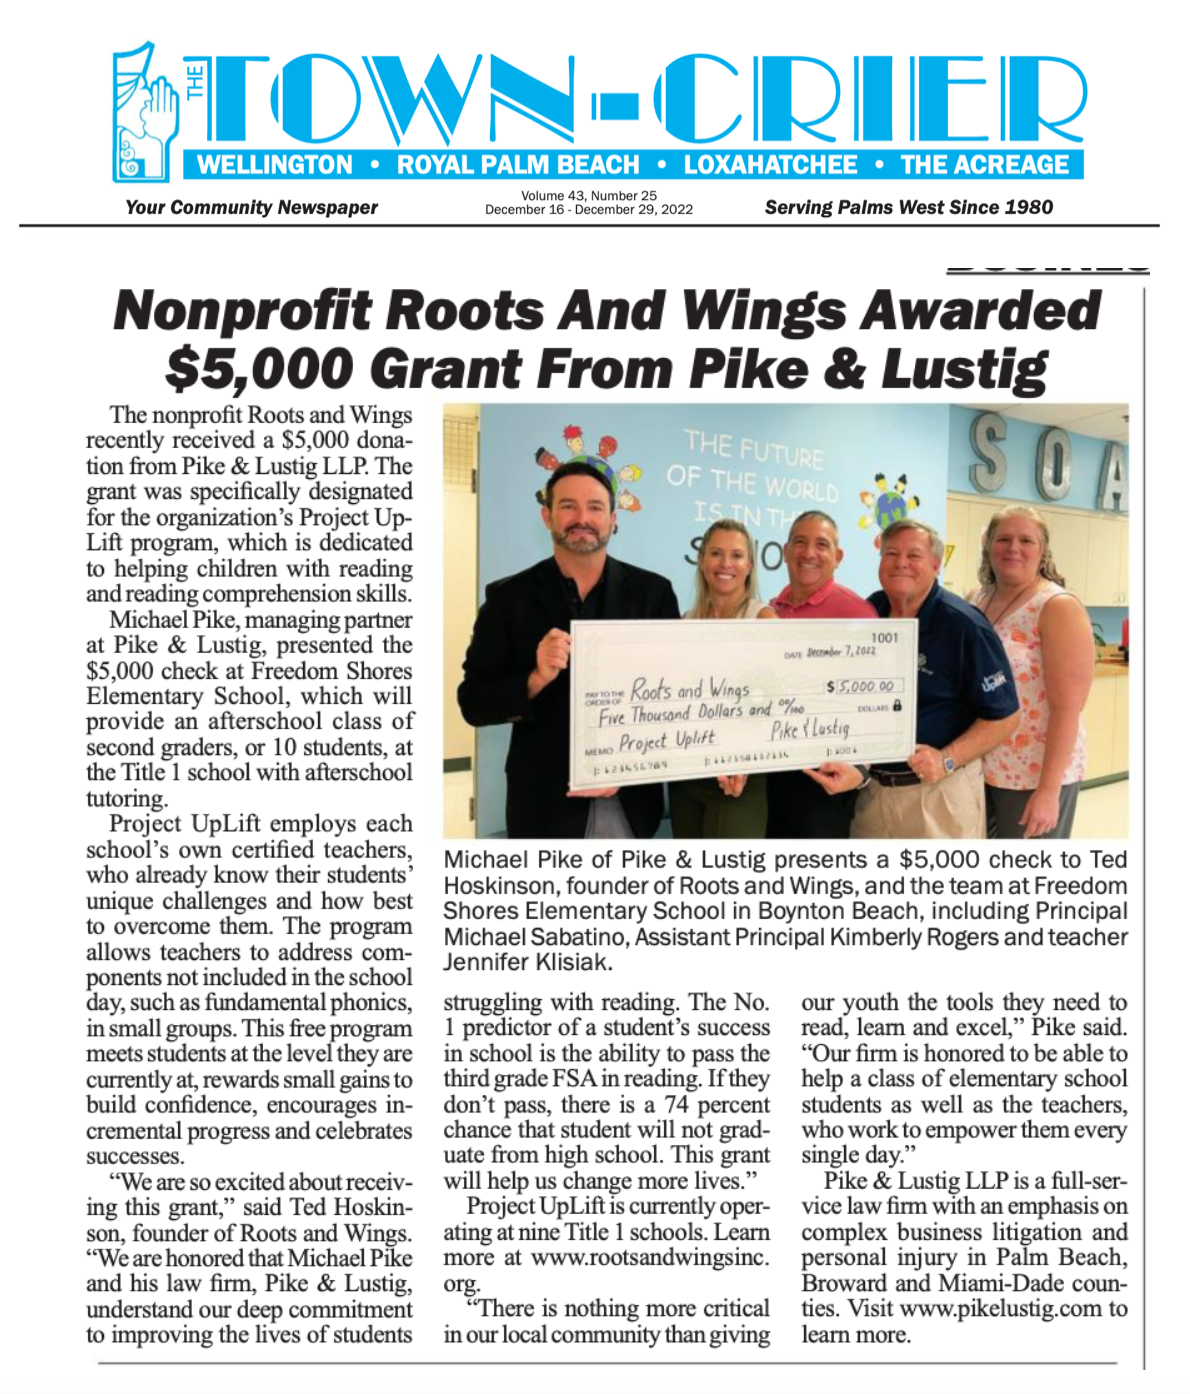 Nonprofit Roots and Wings Awarded $5000 grant